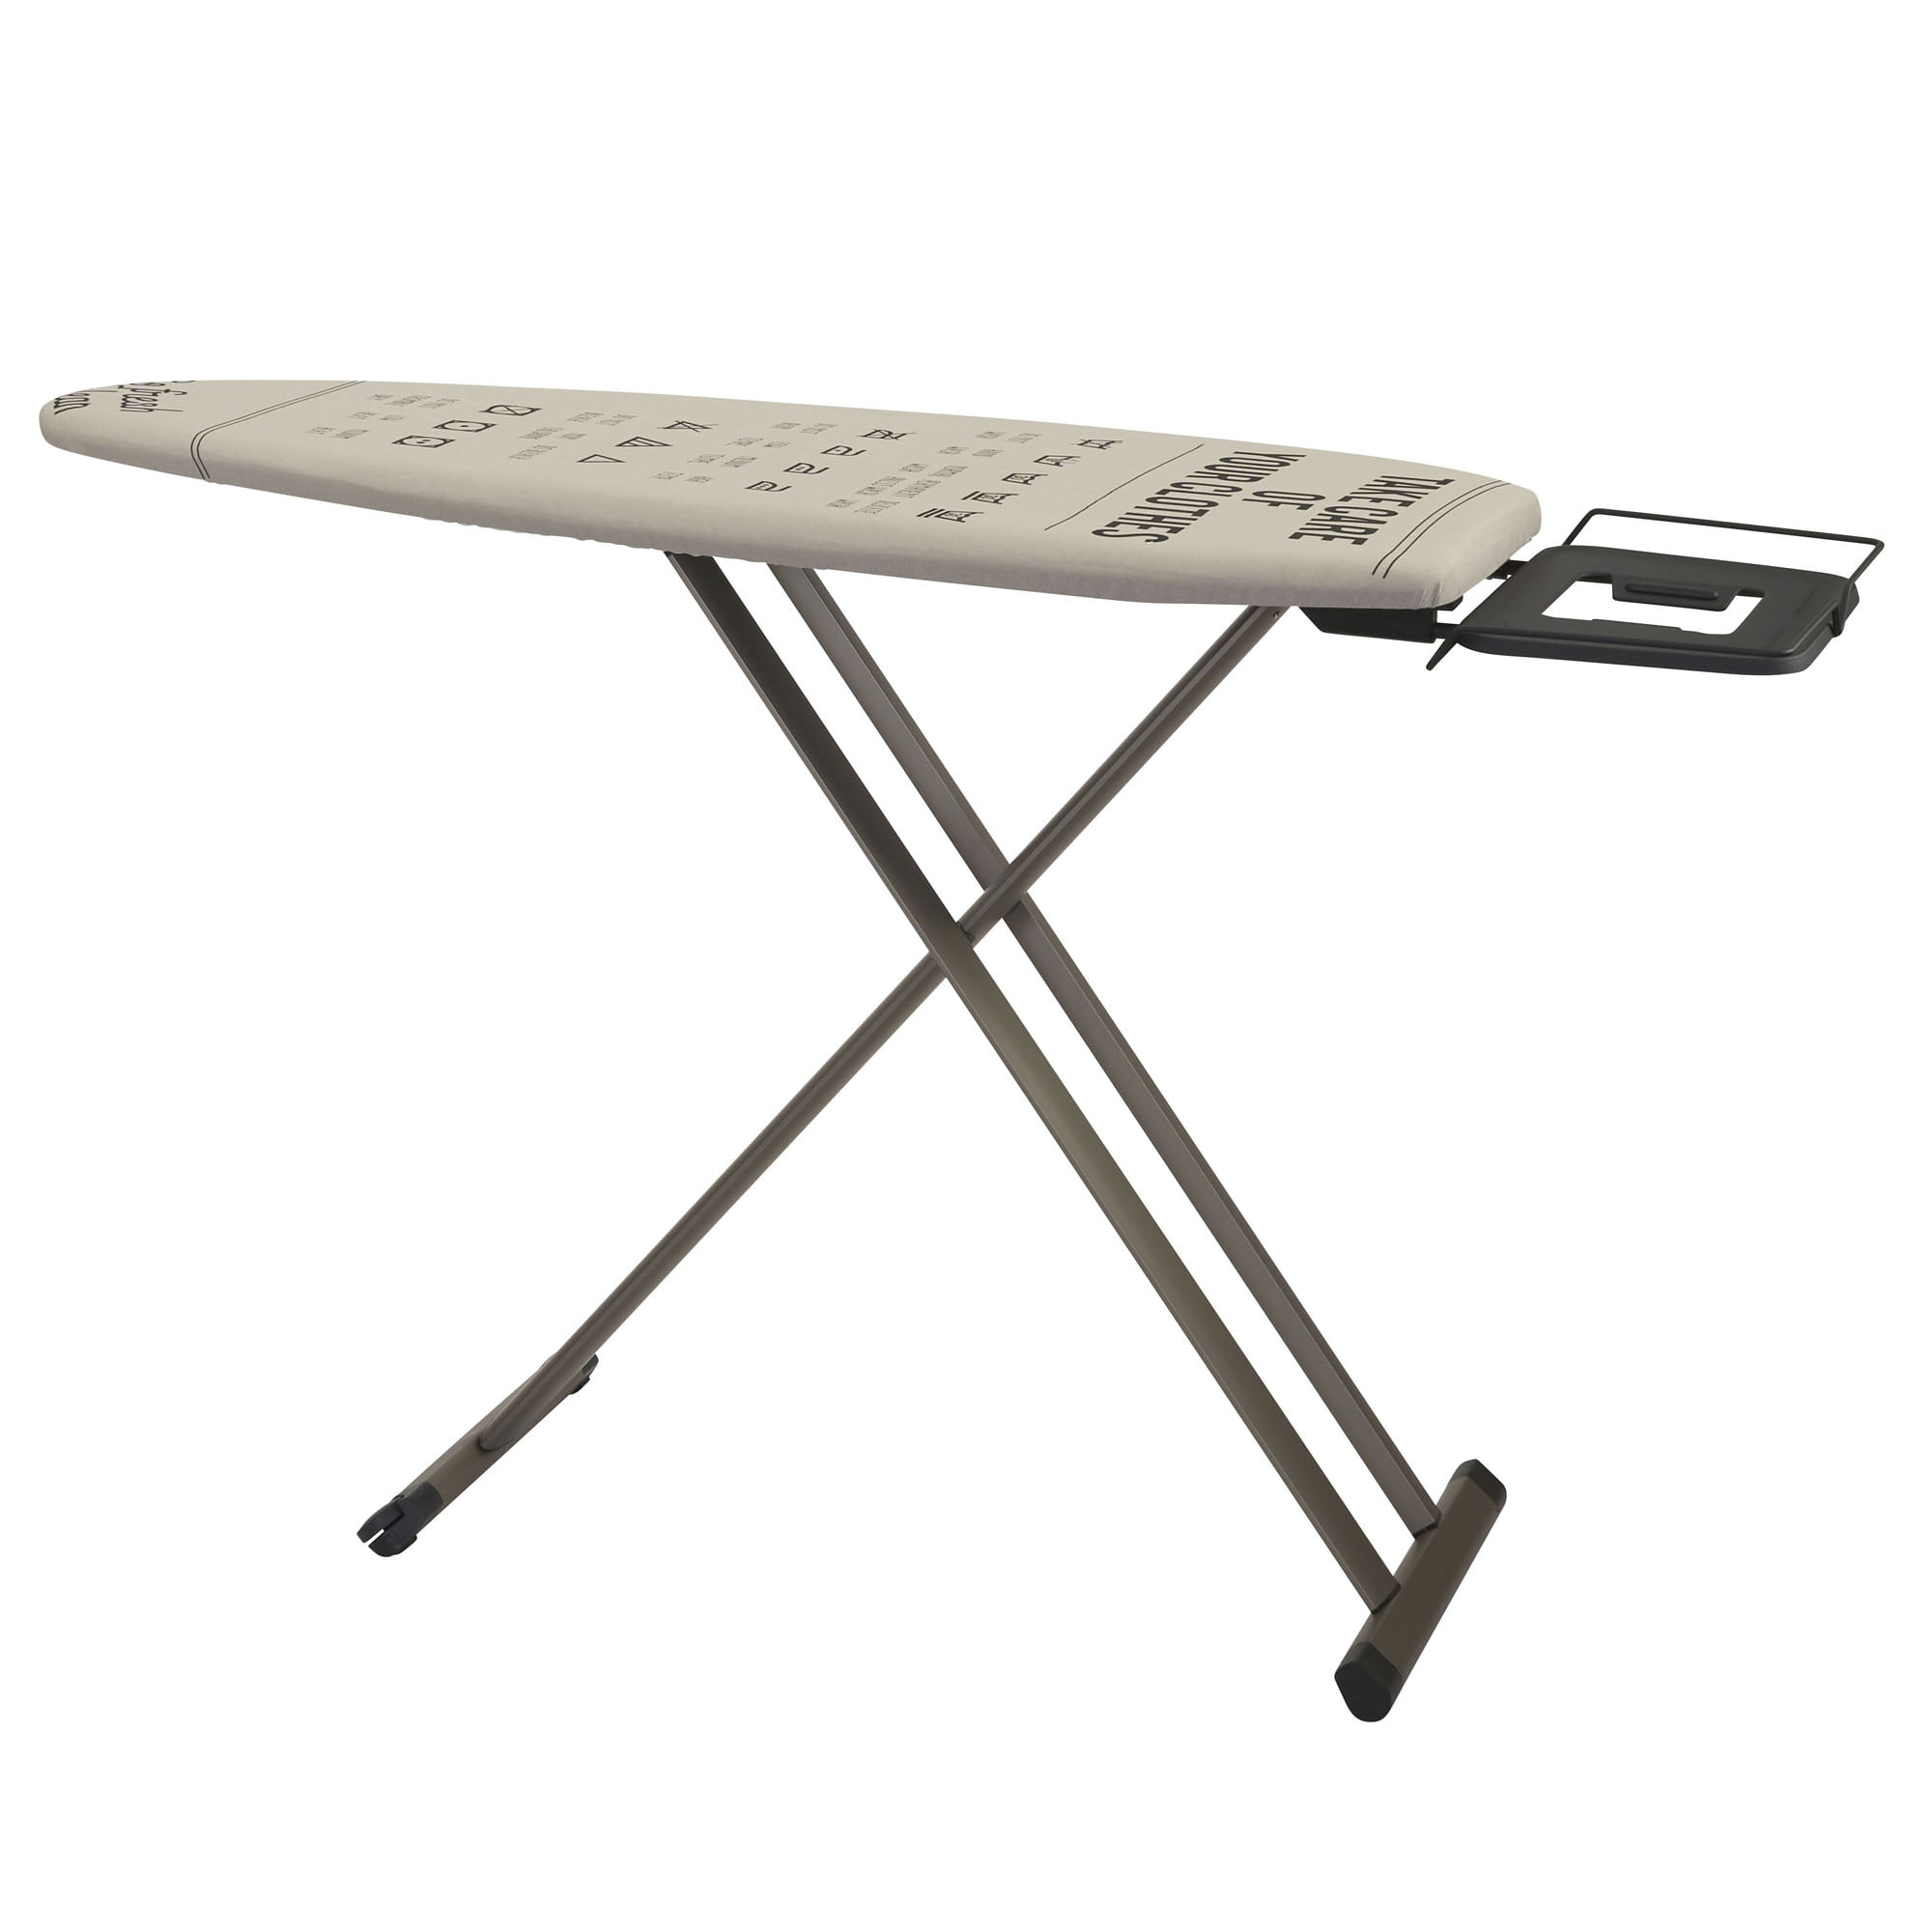 Haudang New Ironing Board Home Travel Portable Sleeve Cuffs Table With Folding Legs 